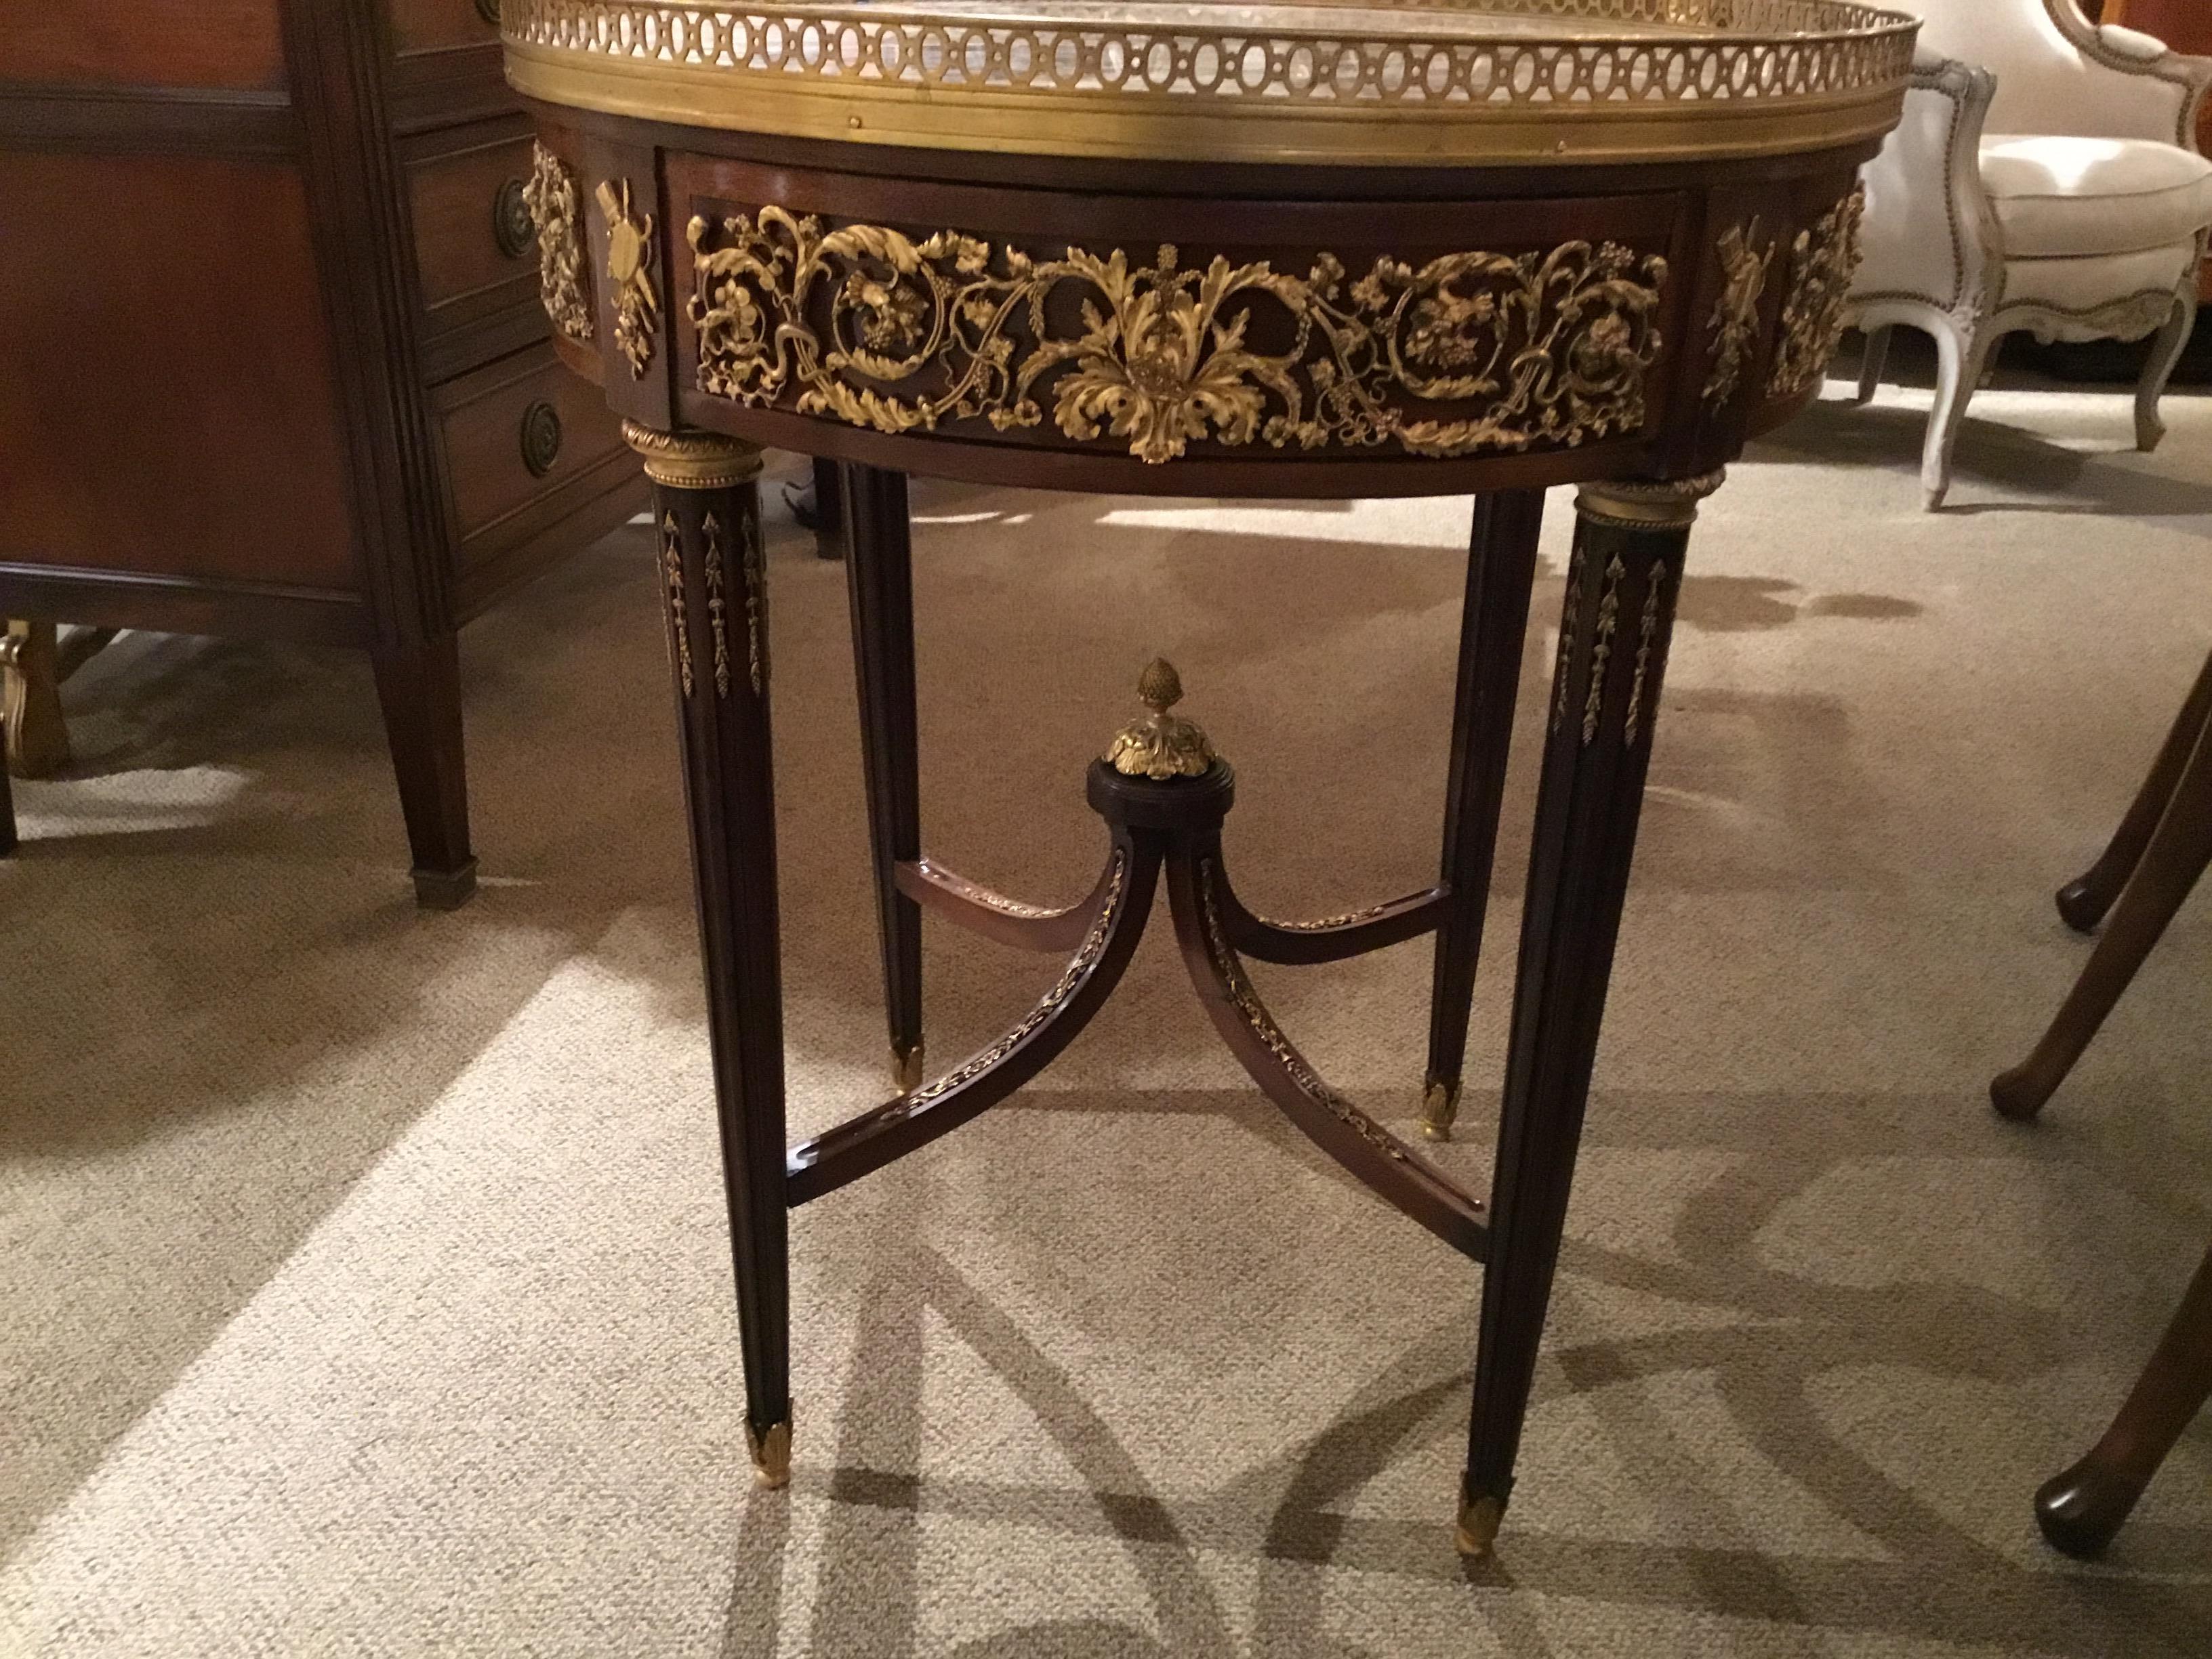 Circular marble top within a full pierced brass gallery, above a conforming
Frieze, paneled and fitted with a single drawer, each panel with an applied
Scrolling foliate ormolu mount, raised on fluted tapering circular legs joined
By a